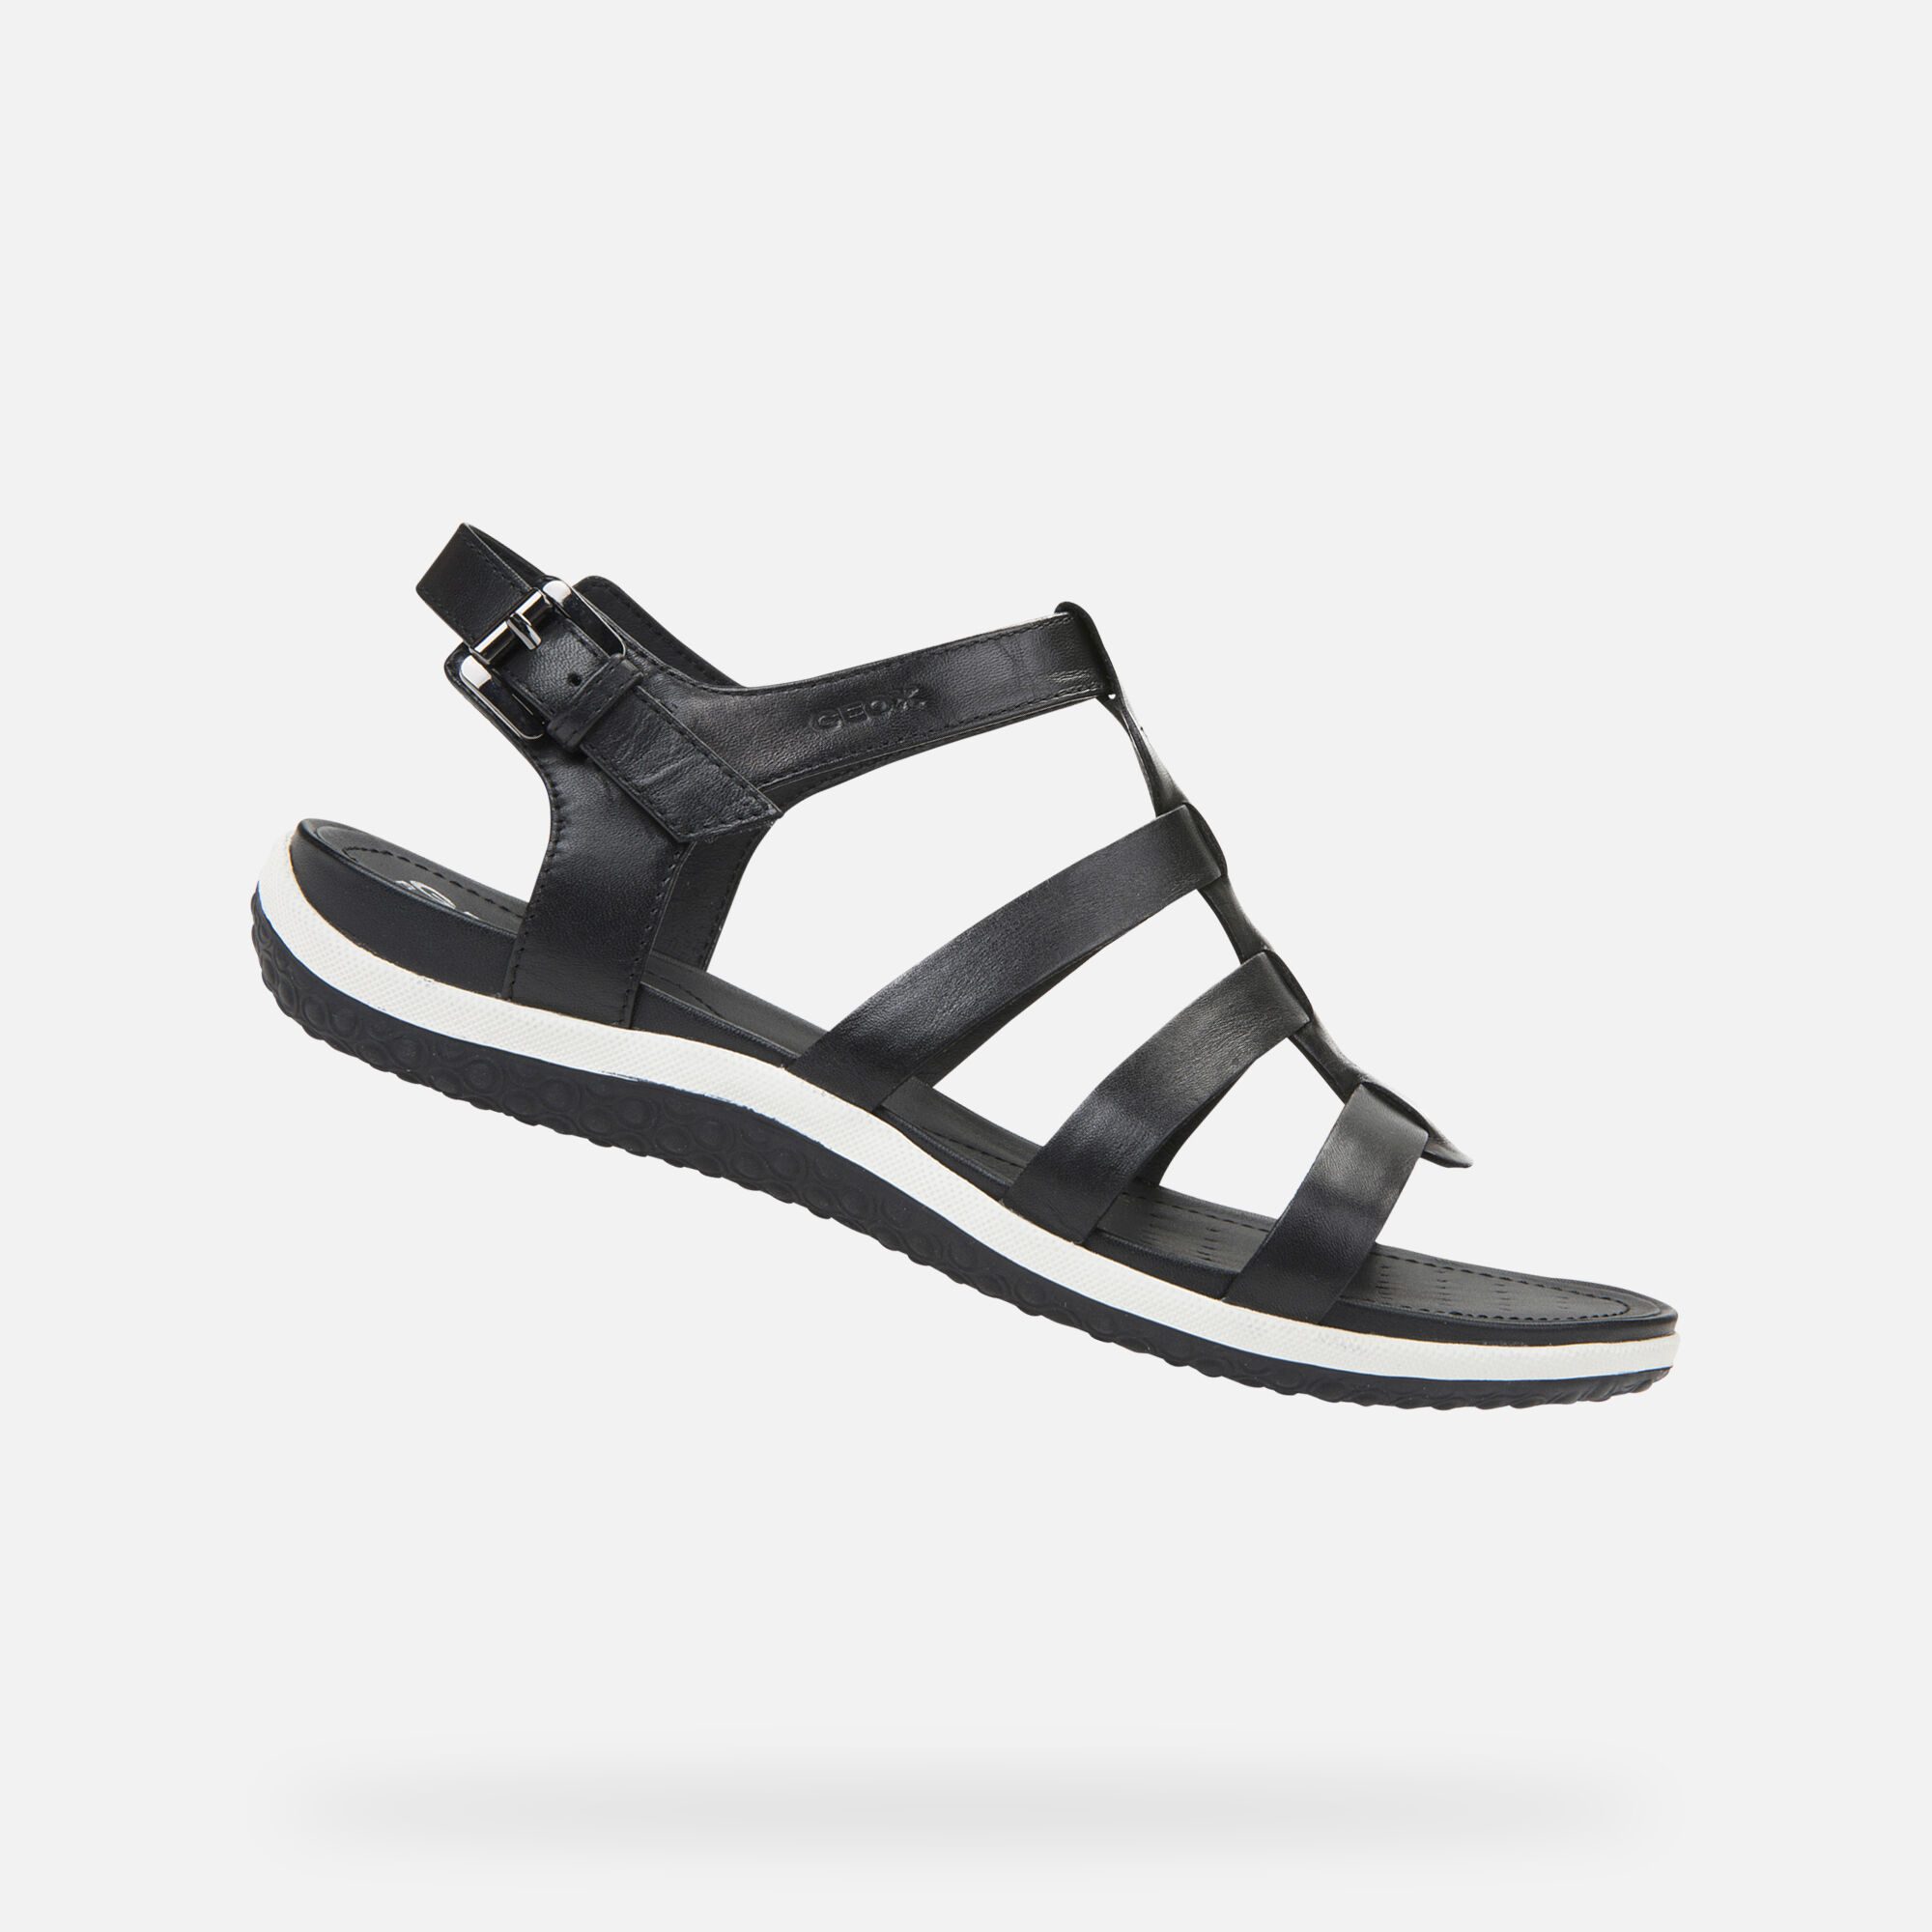 Geox VEGA Woman: Black Sandals | Geox ® Official Store